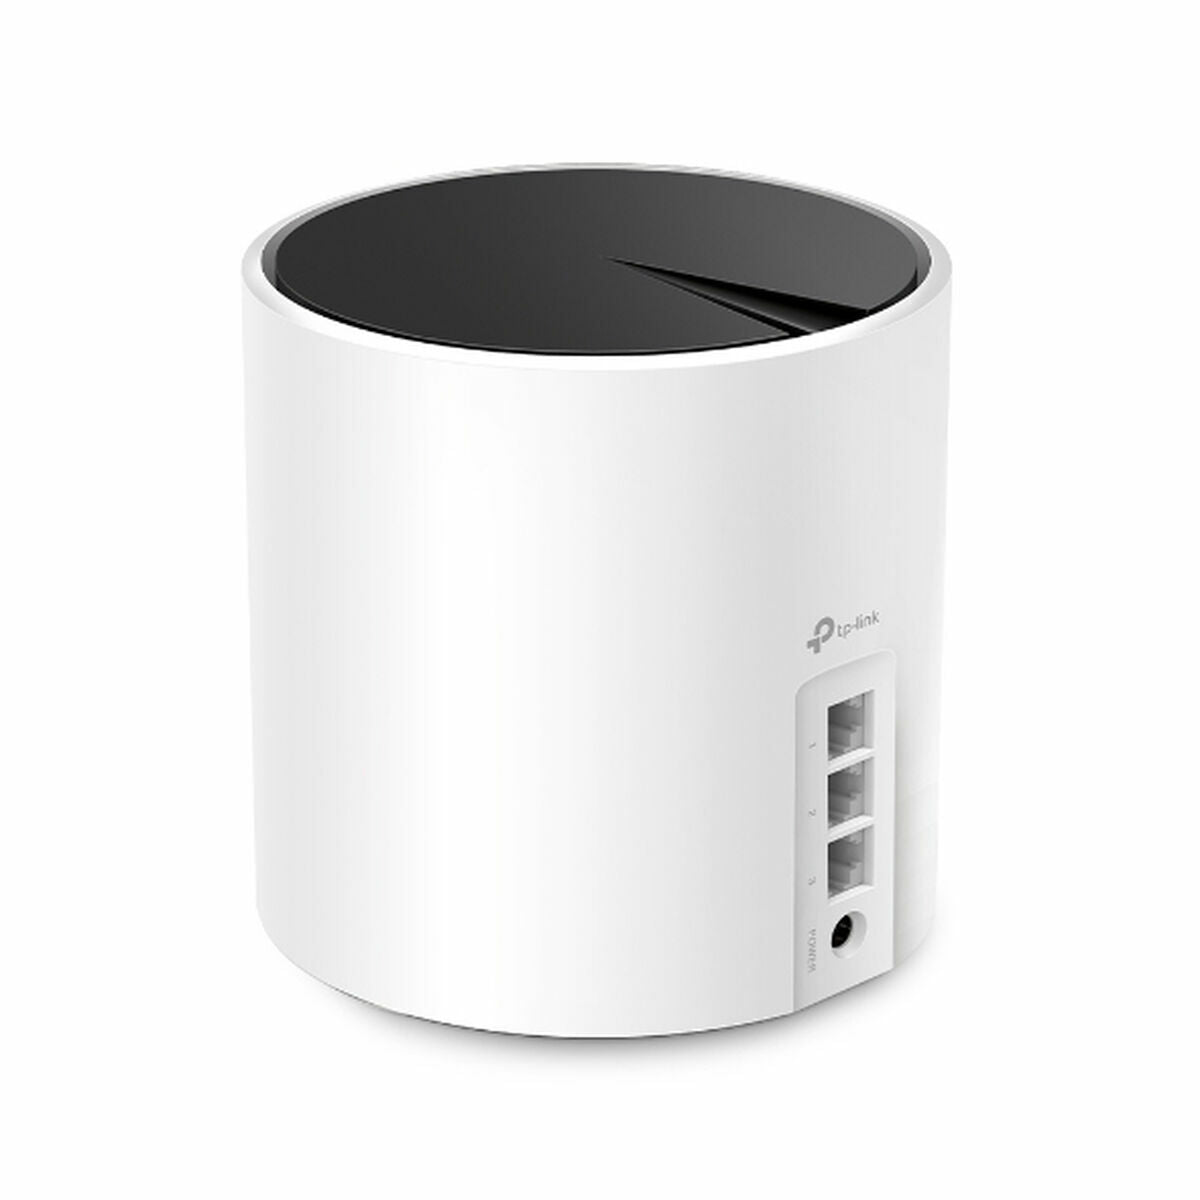 Access point TP-Link White Wi-Fi, TP-Link, Computing, Network devices, access-point-tp-link-white-wi-fi, Brand_TP-Link, category-reference-2609, category-reference-2803, category-reference-2820, category-reference-t-19685, category-reference-t-19914, Condition_NEW, networks/wiring, Price_200 - 300, RiotNook